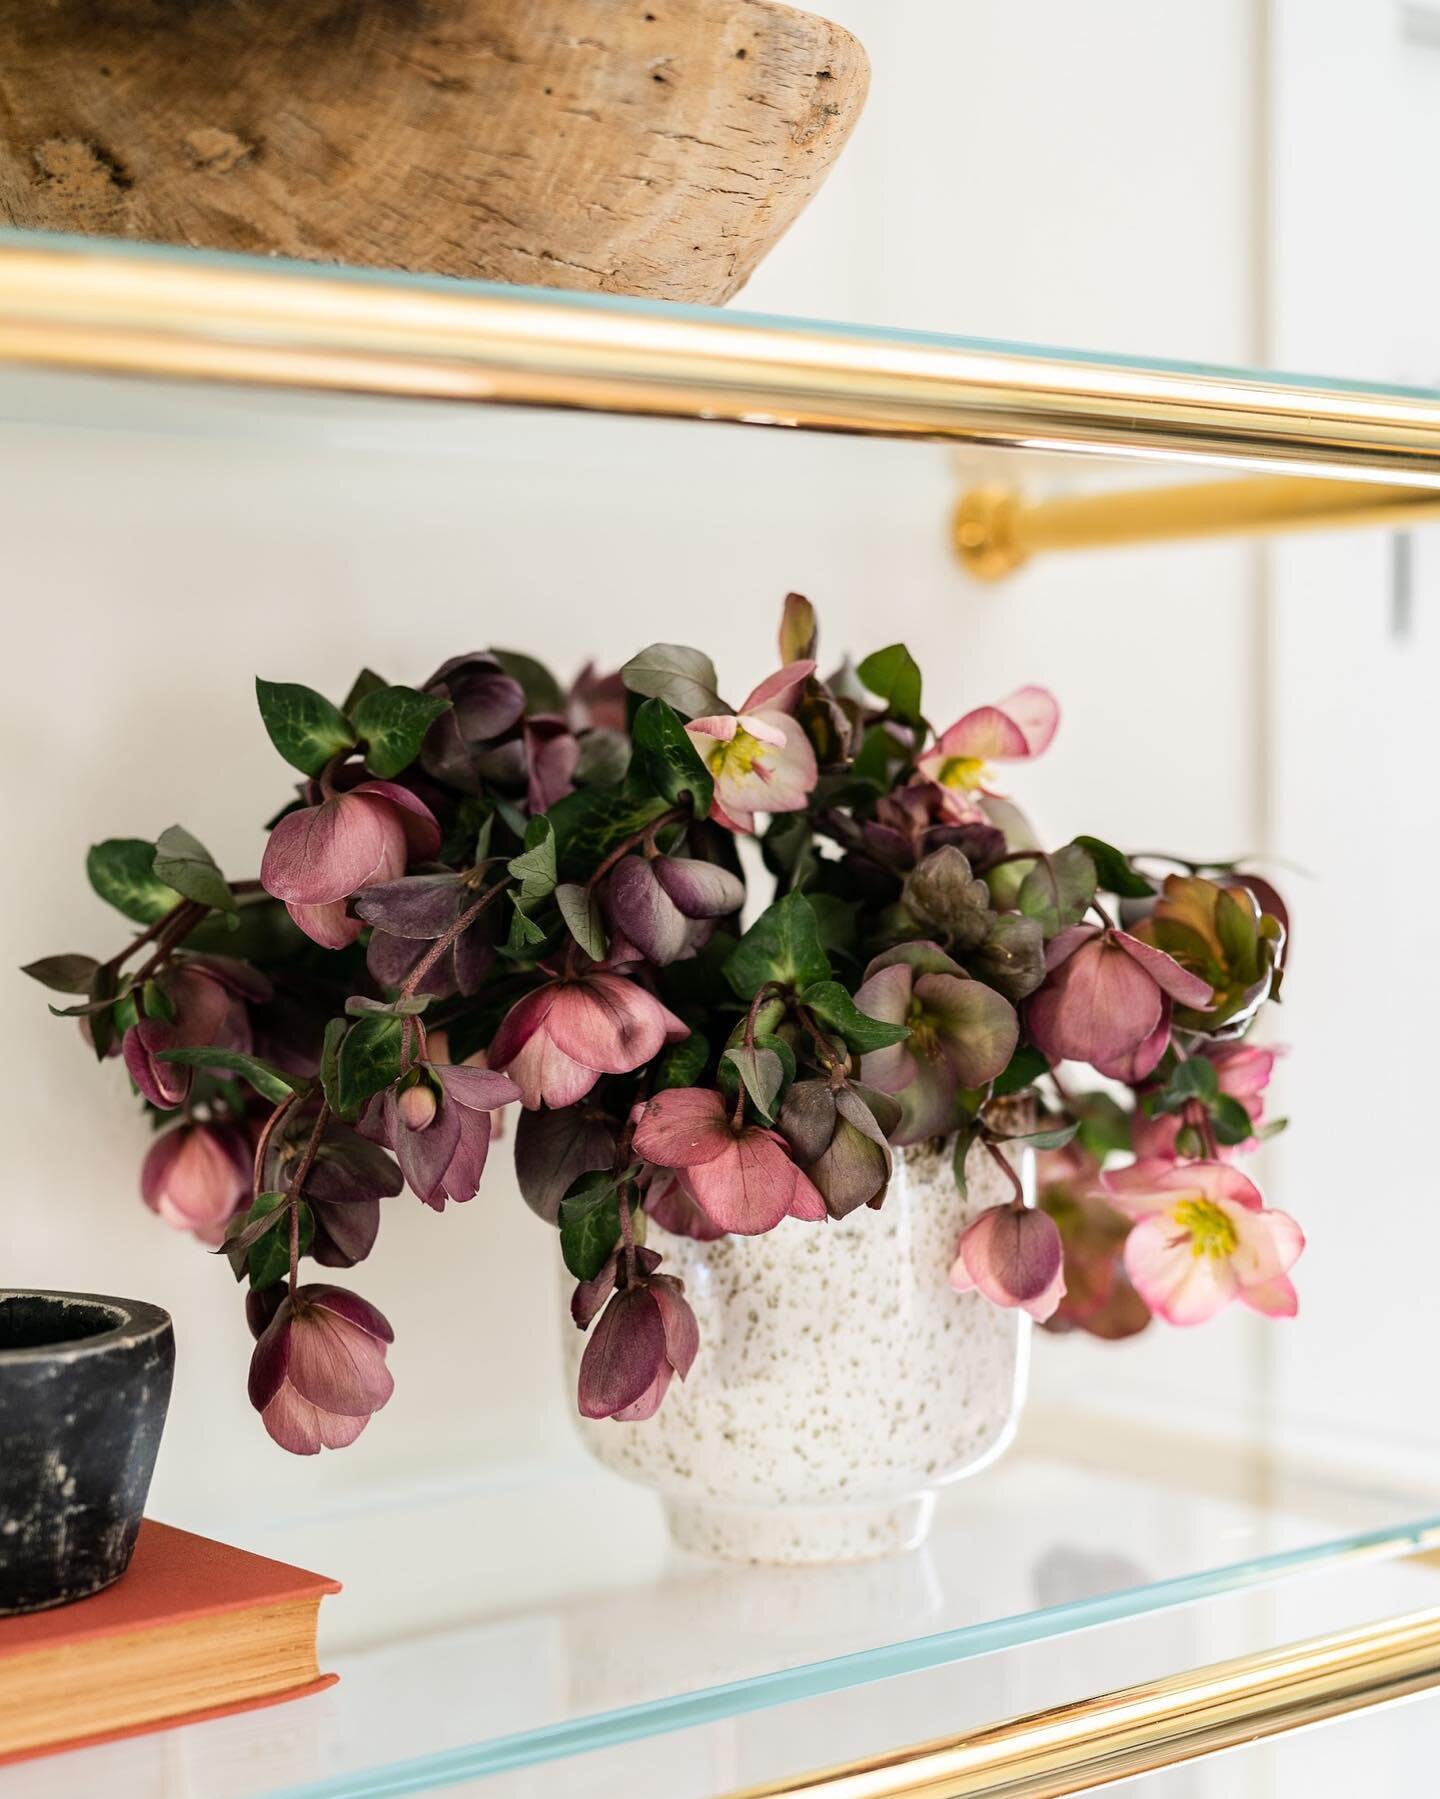 Styling Kitchen shelves and counters makes all the difference when in the home stretch of a renovation or new build. It&rsquo;s these final touches that bring feeling to the new space and shouldn&rsquo;t be overlooked. As a treat, include fresh flora